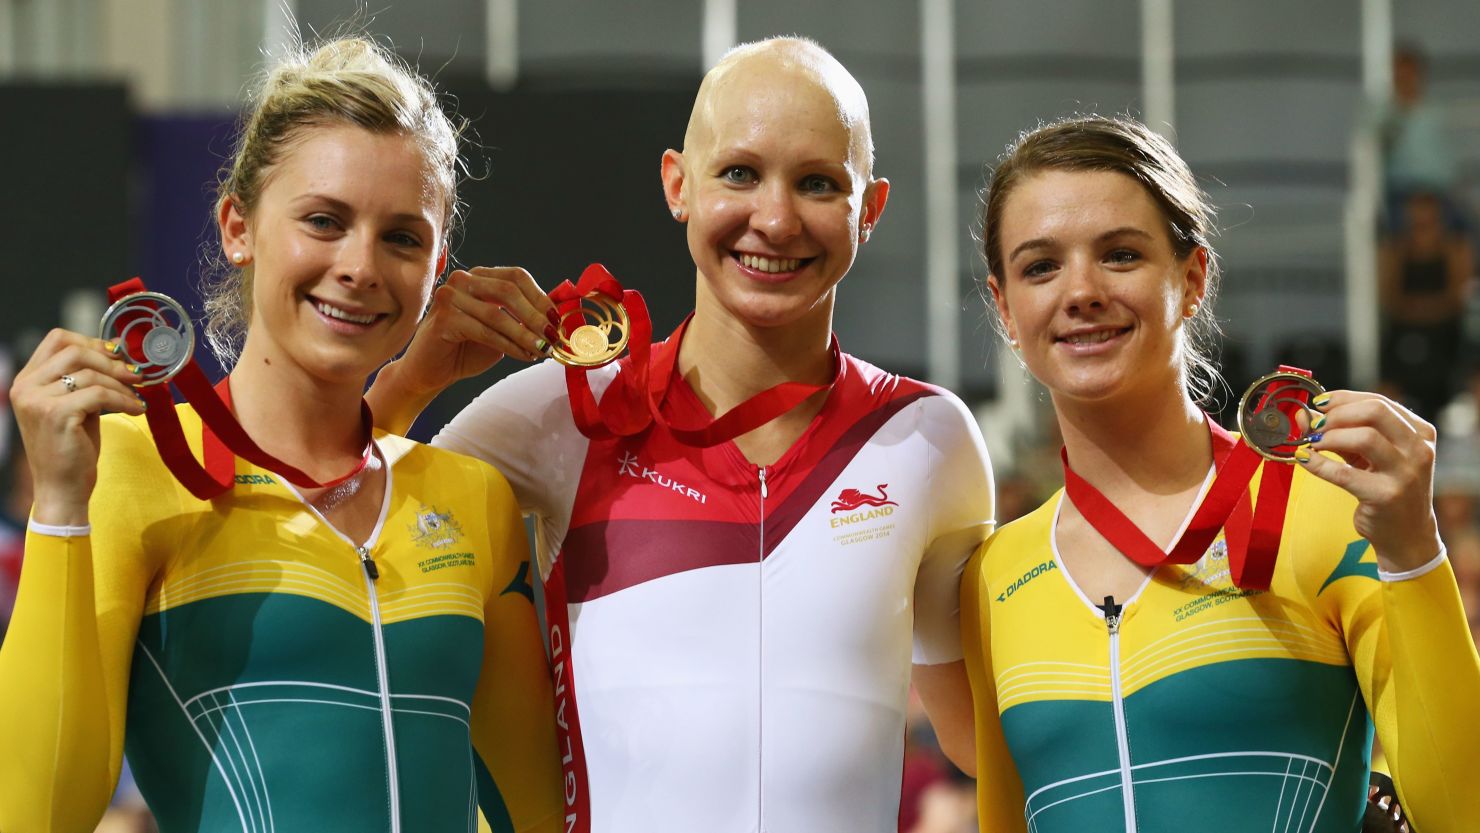 Joanna Rowsell is flanked by Australian duo Annette Edmonson and Amy Cure (right) after the medal presentation for the women's individual pursuit.